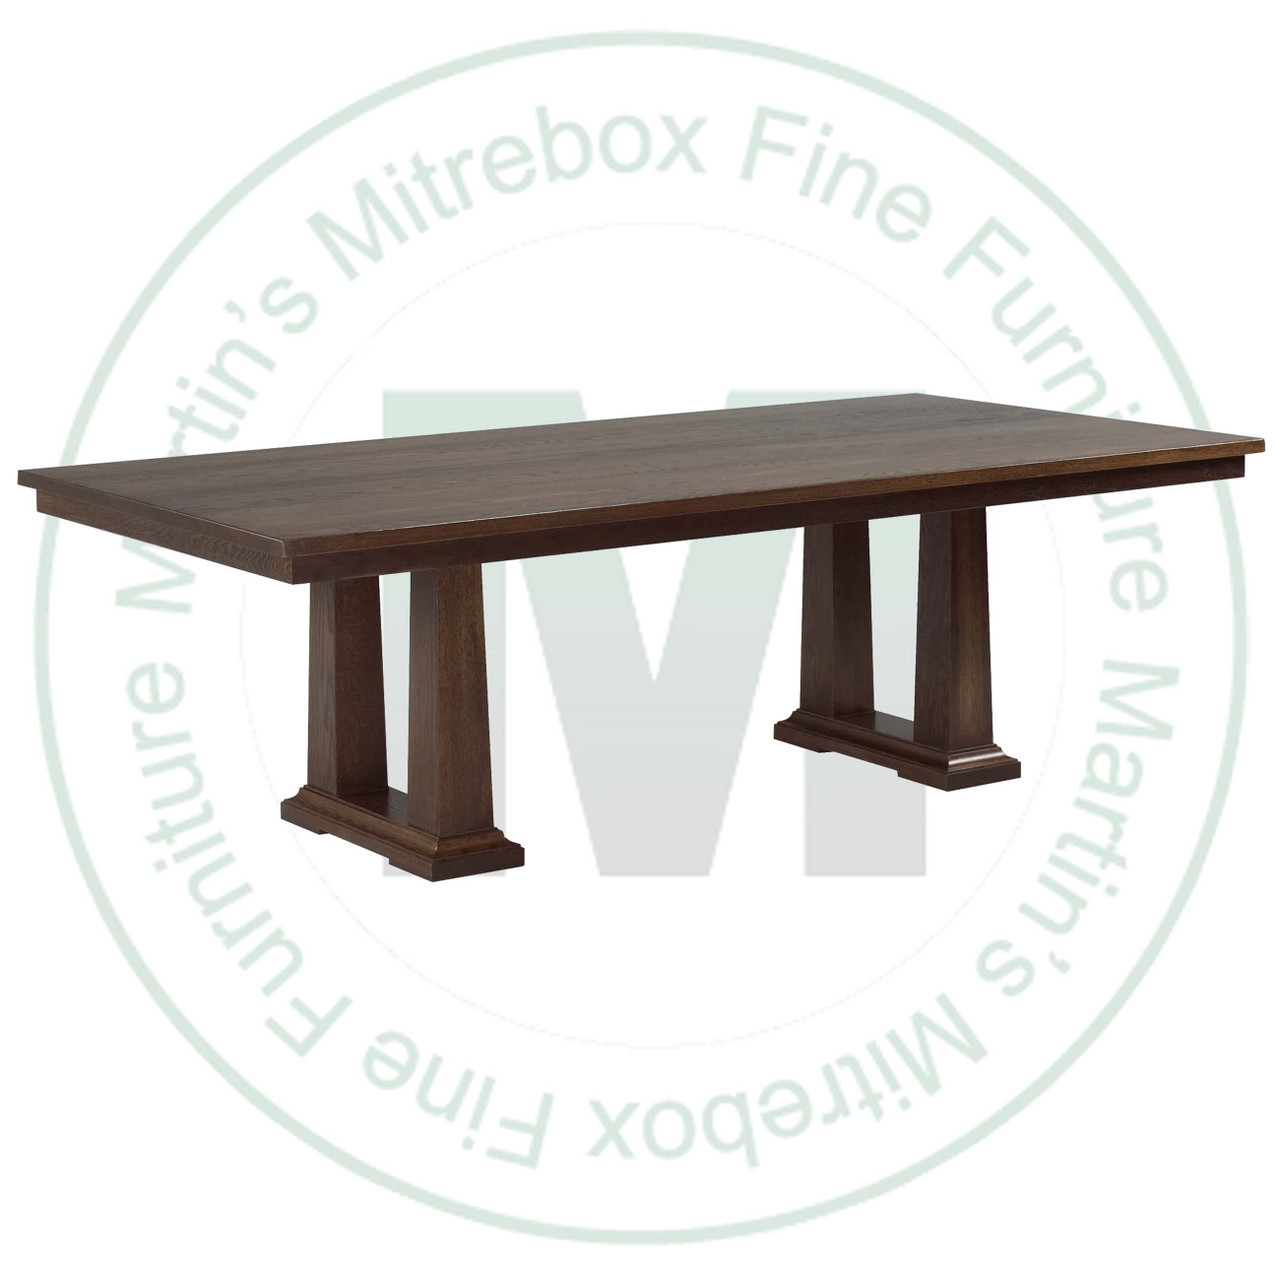 Maple Acropolis Solid Top Double Pedestal Table 42''D x 108''W x 30''H Table Has 1.25'' Thick Top